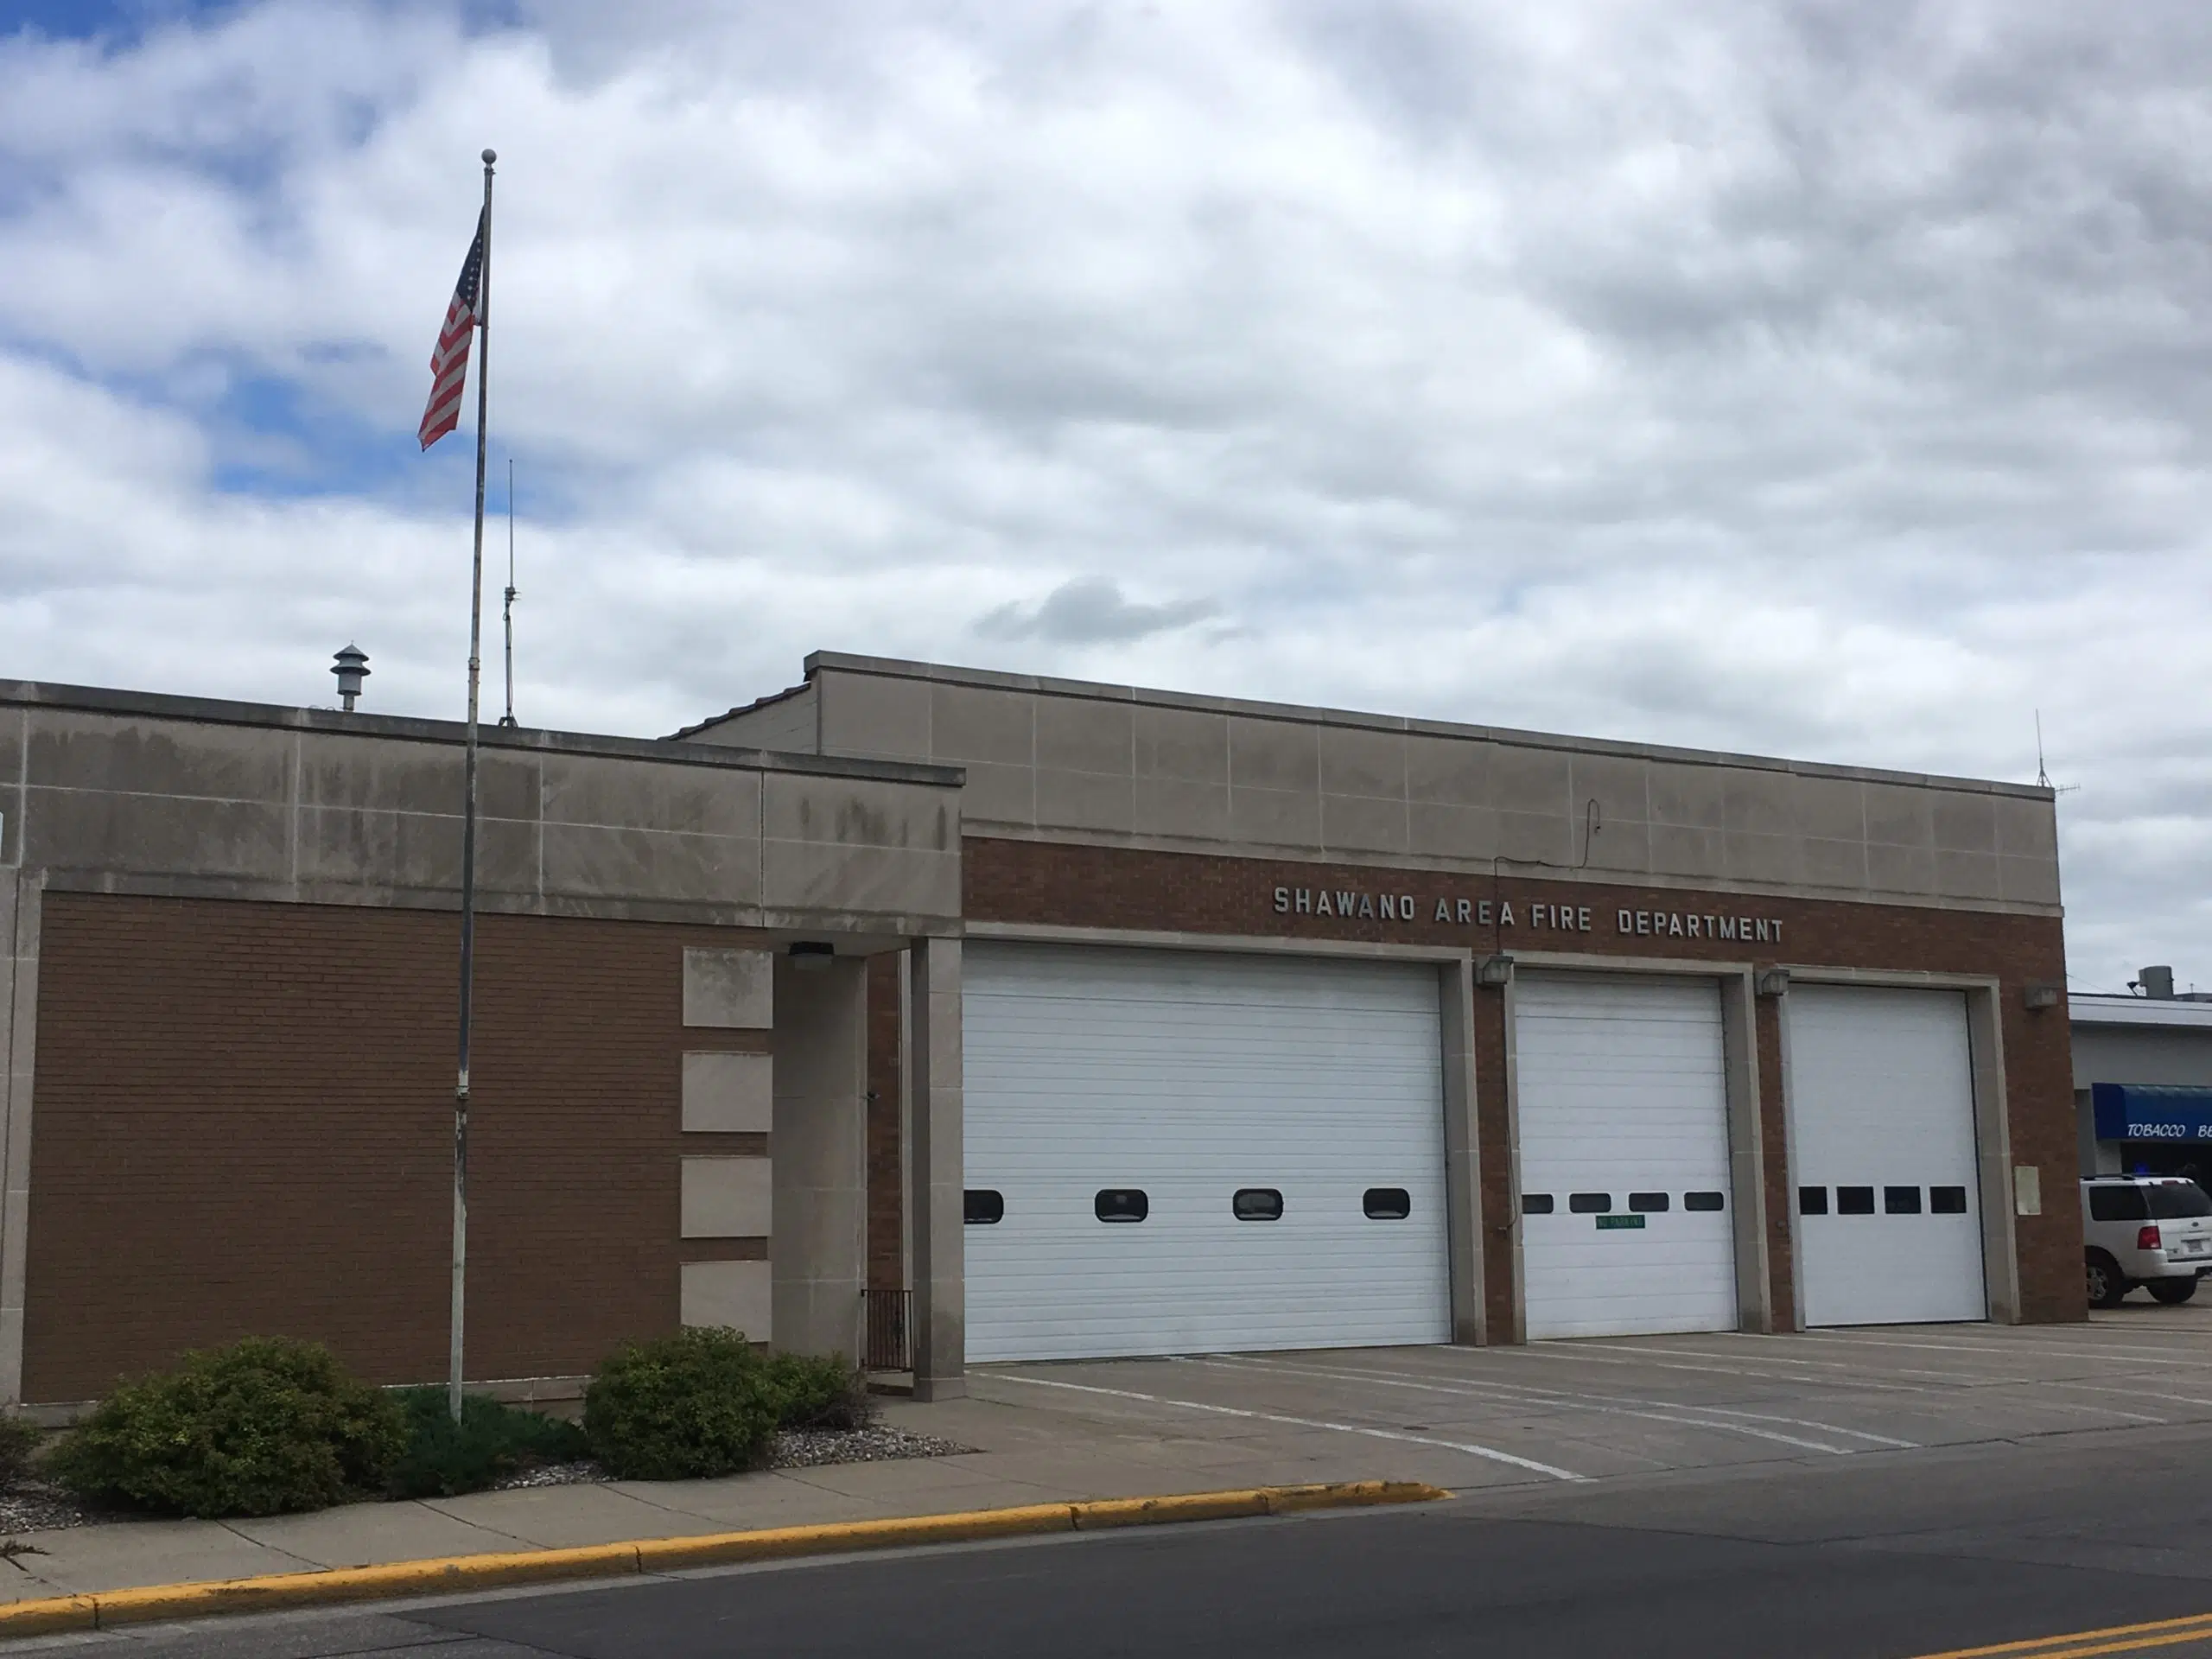 Shawano Fire Department building to receive improvements